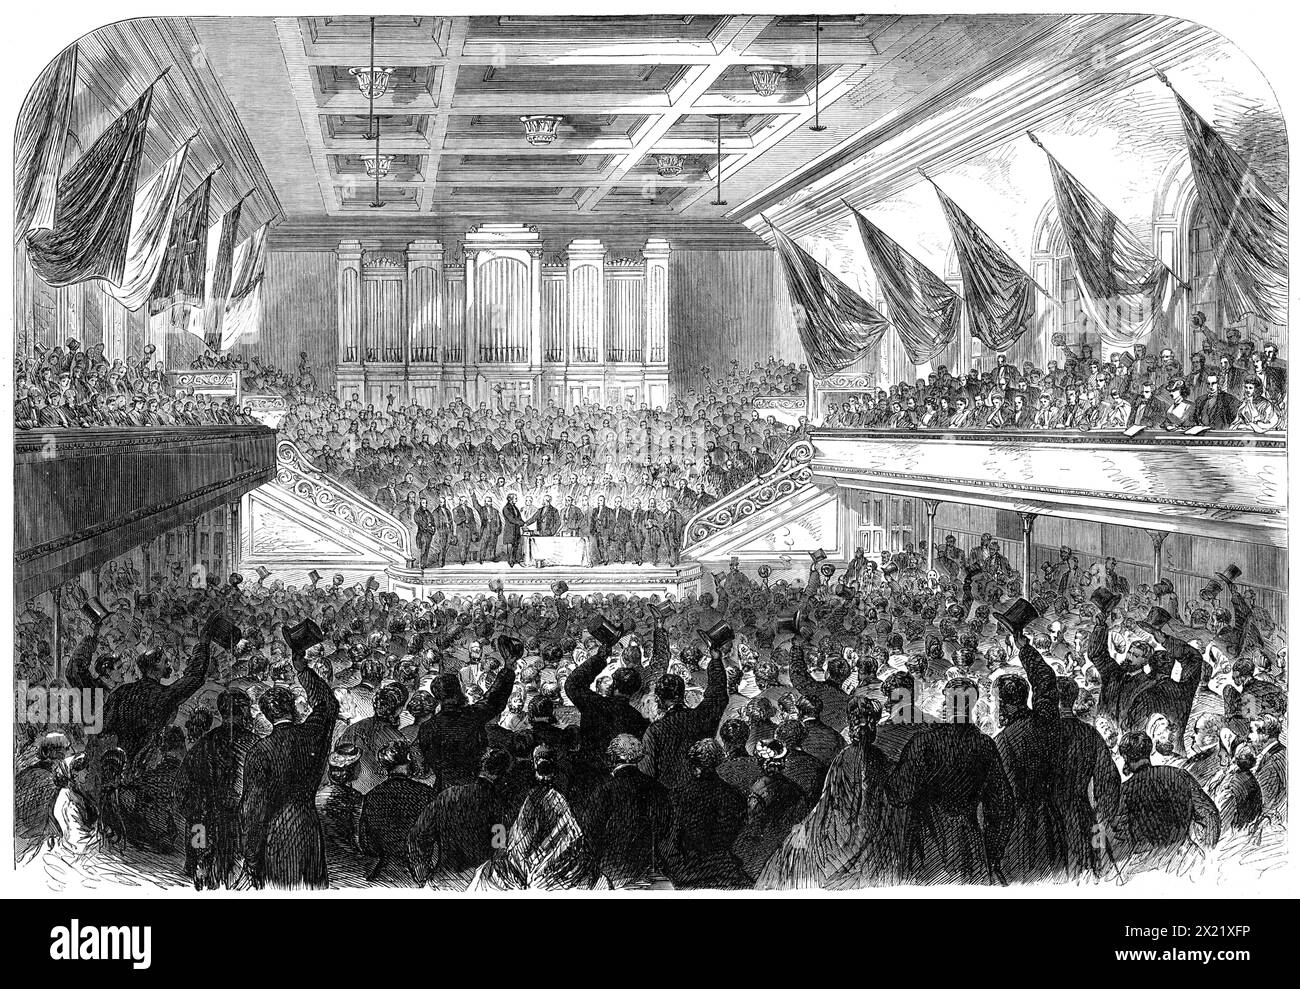 Presentation of the Freedom of the City of Glasgow to the Rt. Hon. W.E. Gladstone, in the City Hall, 1865. 'The hall was, of course, filled with spectators in every part...At two o'clock Mr. Gladstone [Chancellor of the Exchequer and future Prime Minister], accompanied by the Lord Provost, appeared on the platform, and was received with loud and continuous cheering. The Lord Provost, in presenting the freedom of the city to the right hon. gentleman, referred to the distinguished services which Mr. Gladstone had rendered to the country, and the important changes which he had effected in our fin Stock Photo